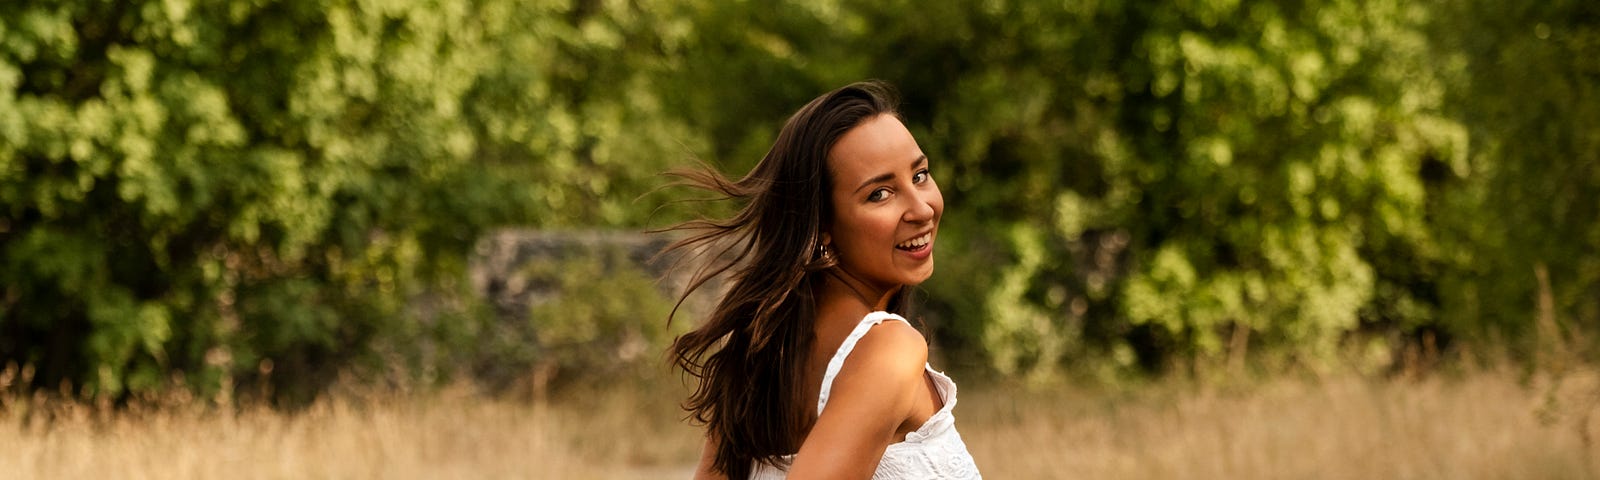 Young woman in white dress running and looking behind at camera laughing